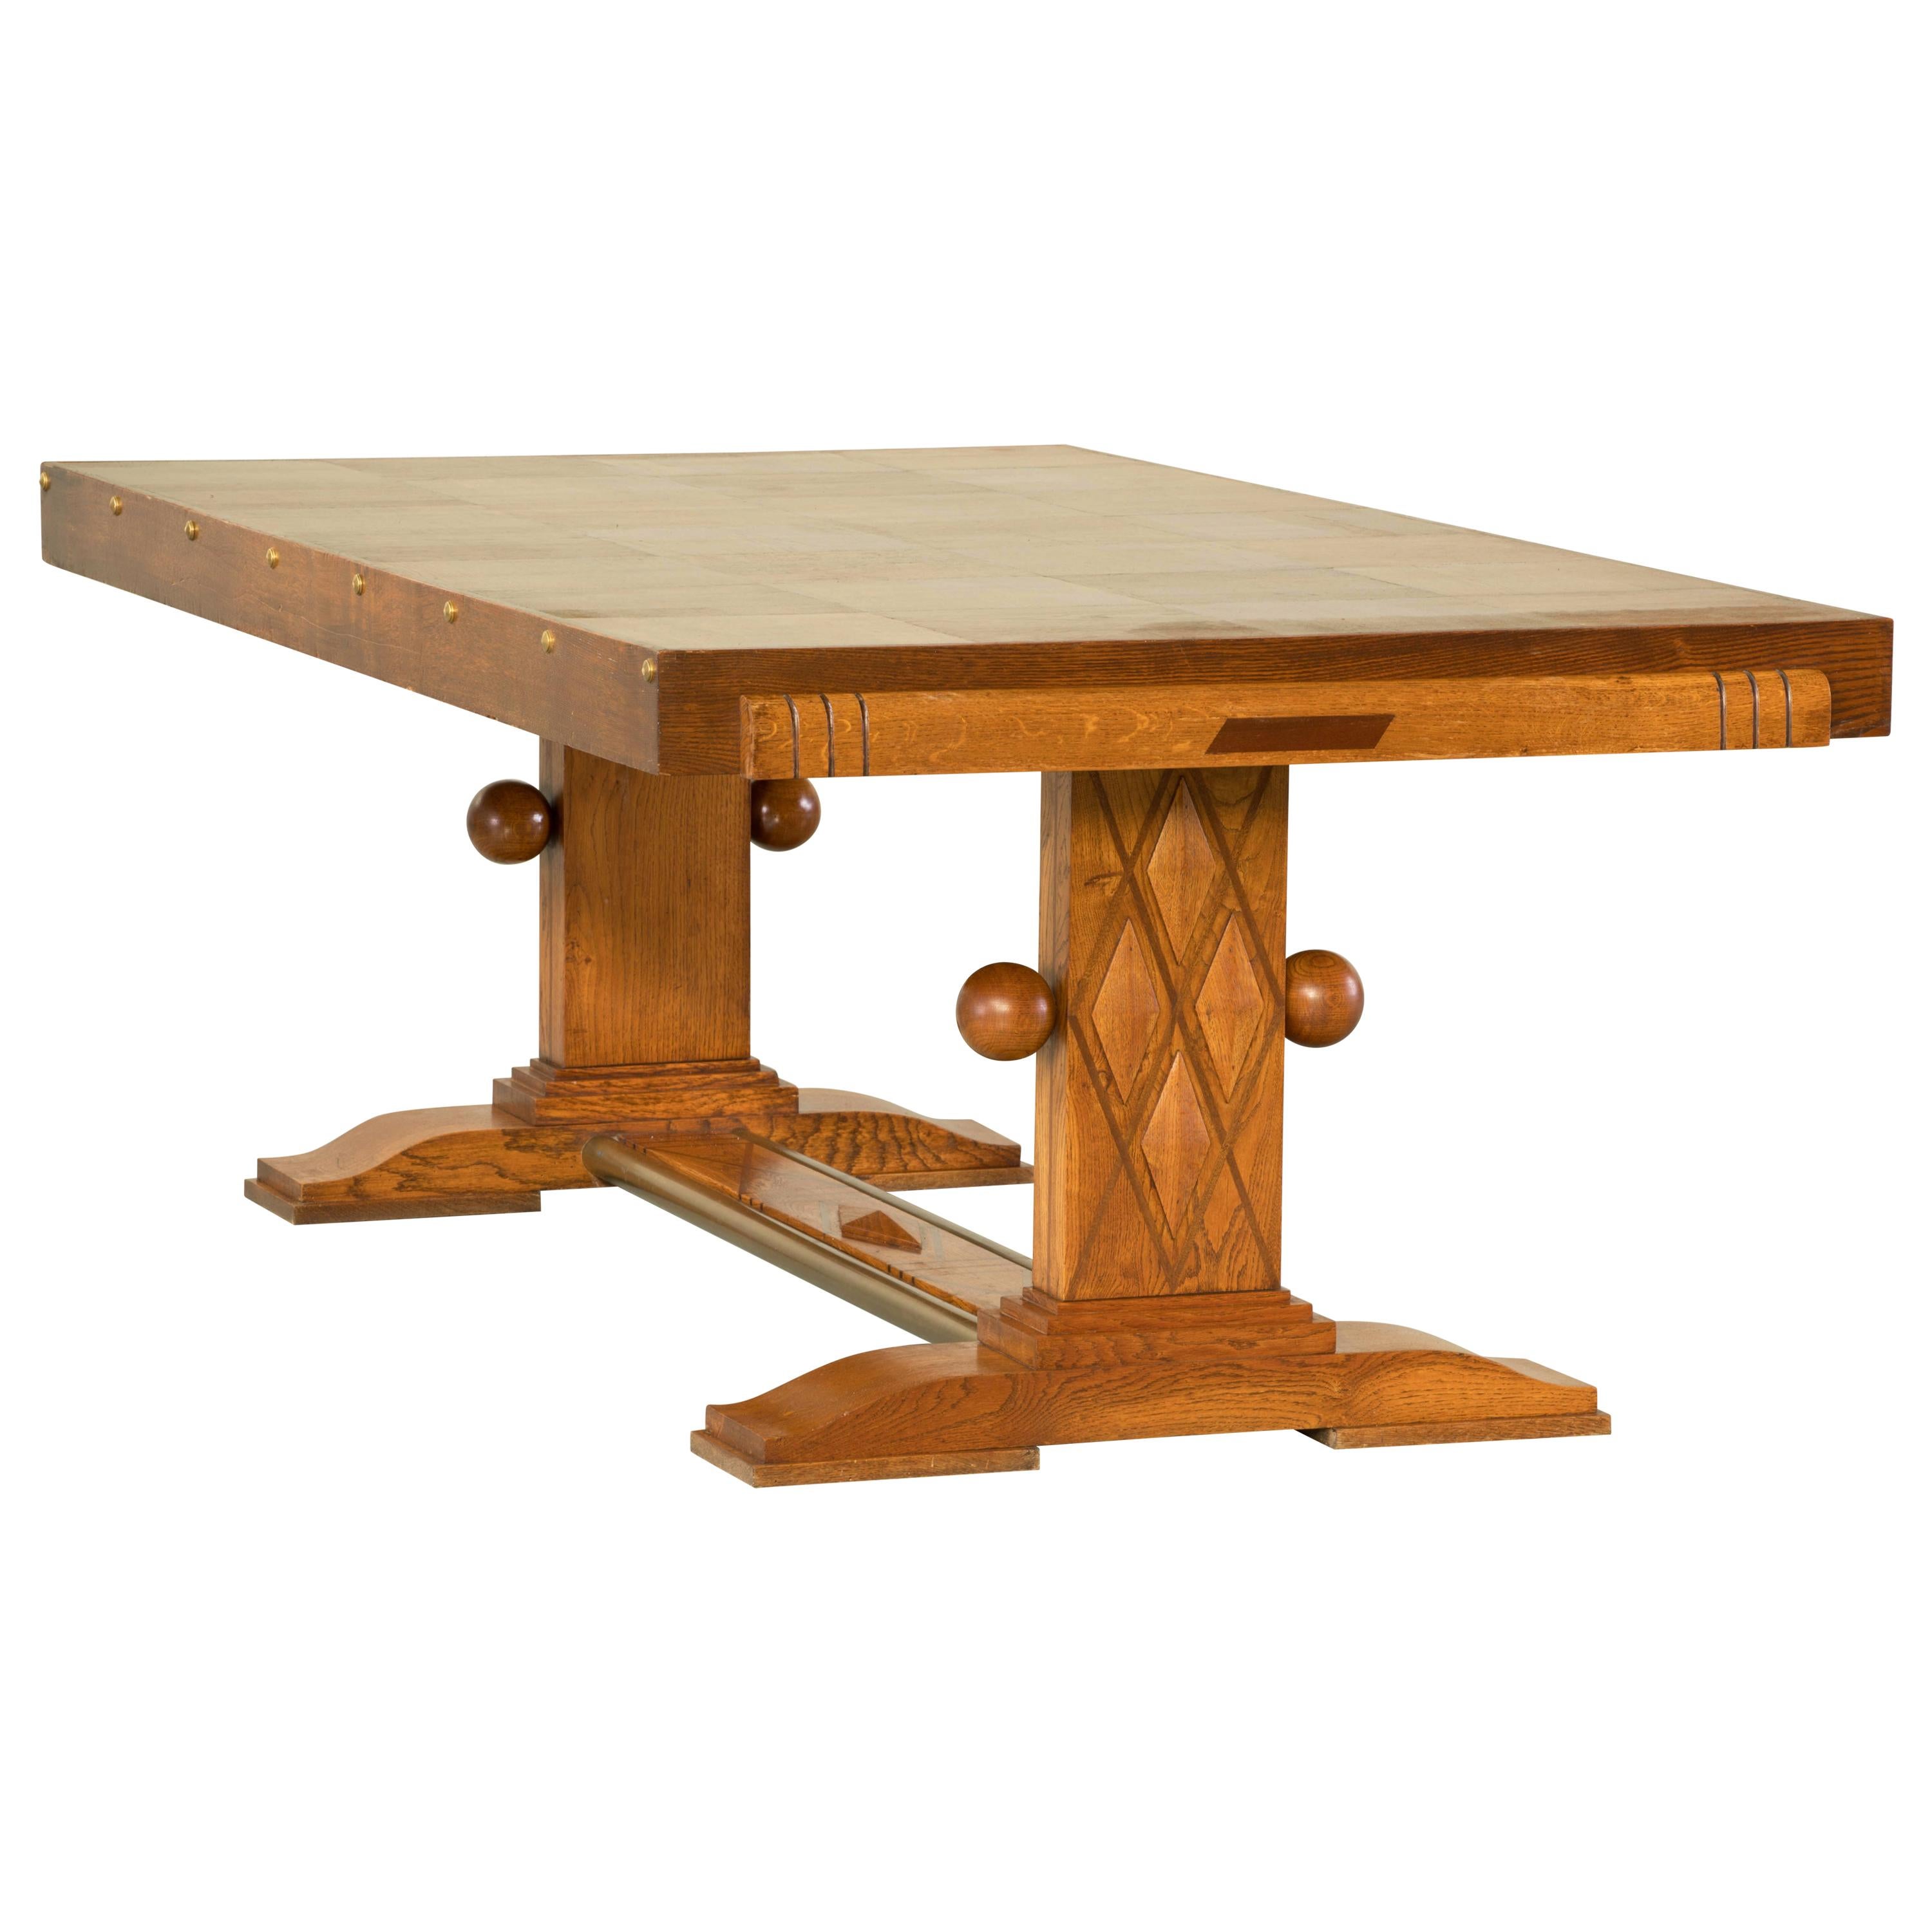 Dining table, oak, France, 1930s attributed to Gaston Poisson.

Majestic centre table in oak. This Art Deco table shows great craftsmanship. The base and legs are beautifully detailed with carving and woodwork. The rectangular top is plain, which